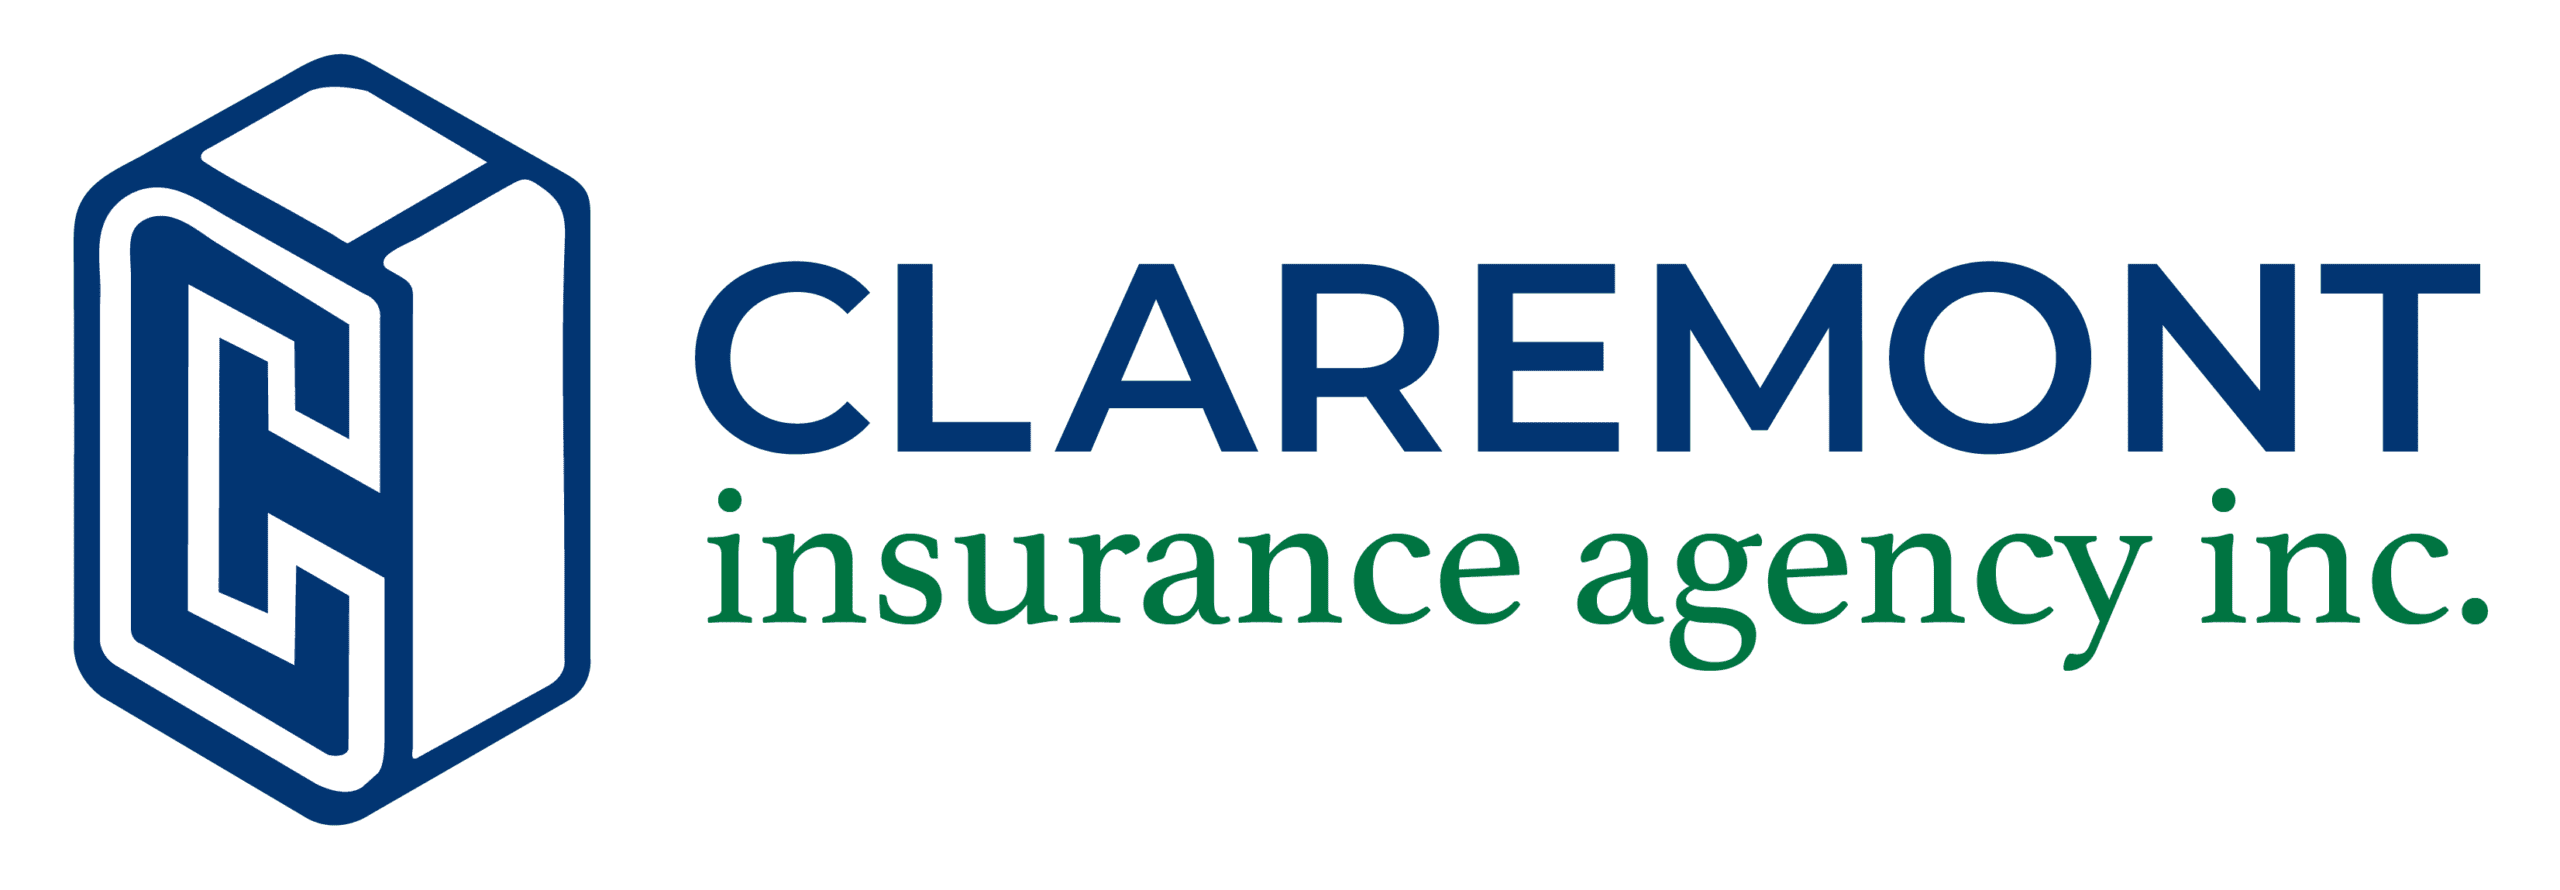 Claremont Insurance Agency